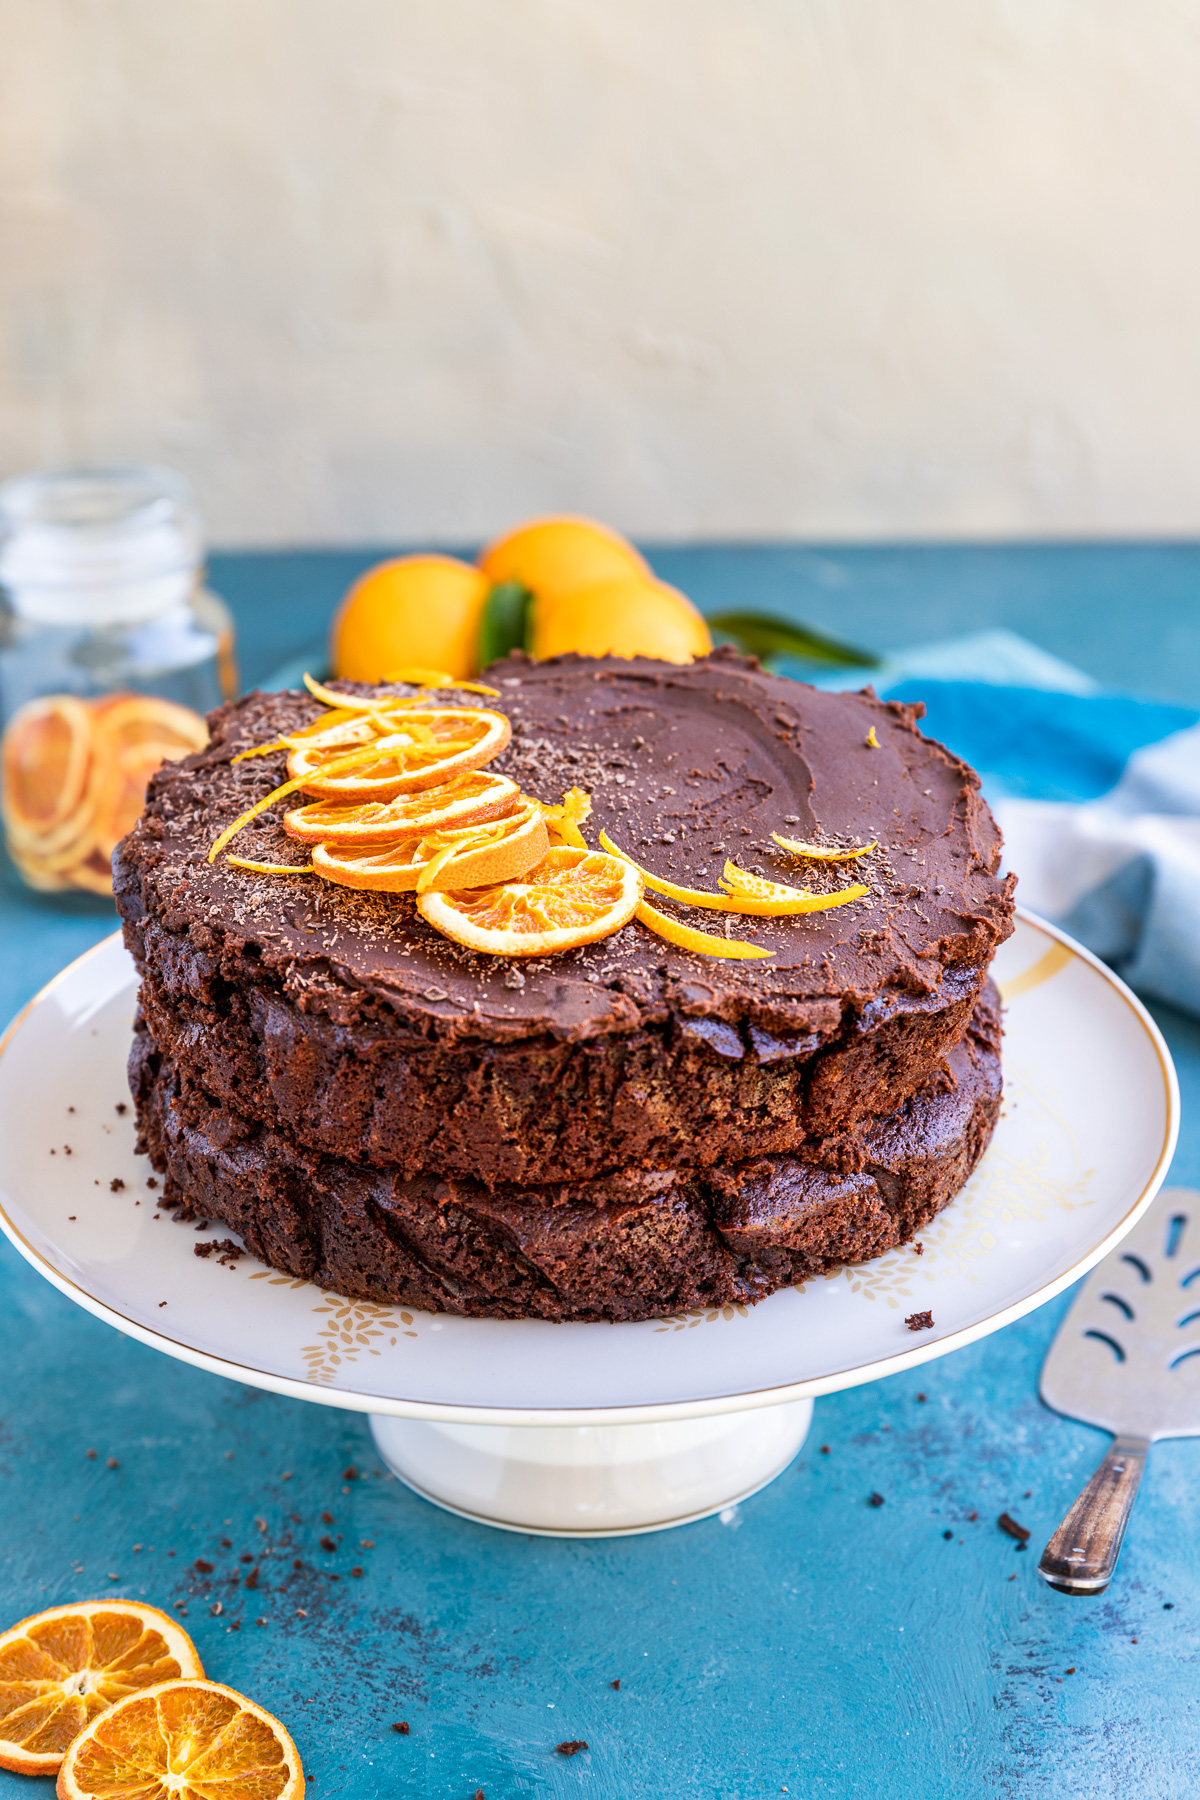 A finished chocolate orange cake decorated with orange slices on a white cake stand and on a blue background with a grey wall and ingredients behind